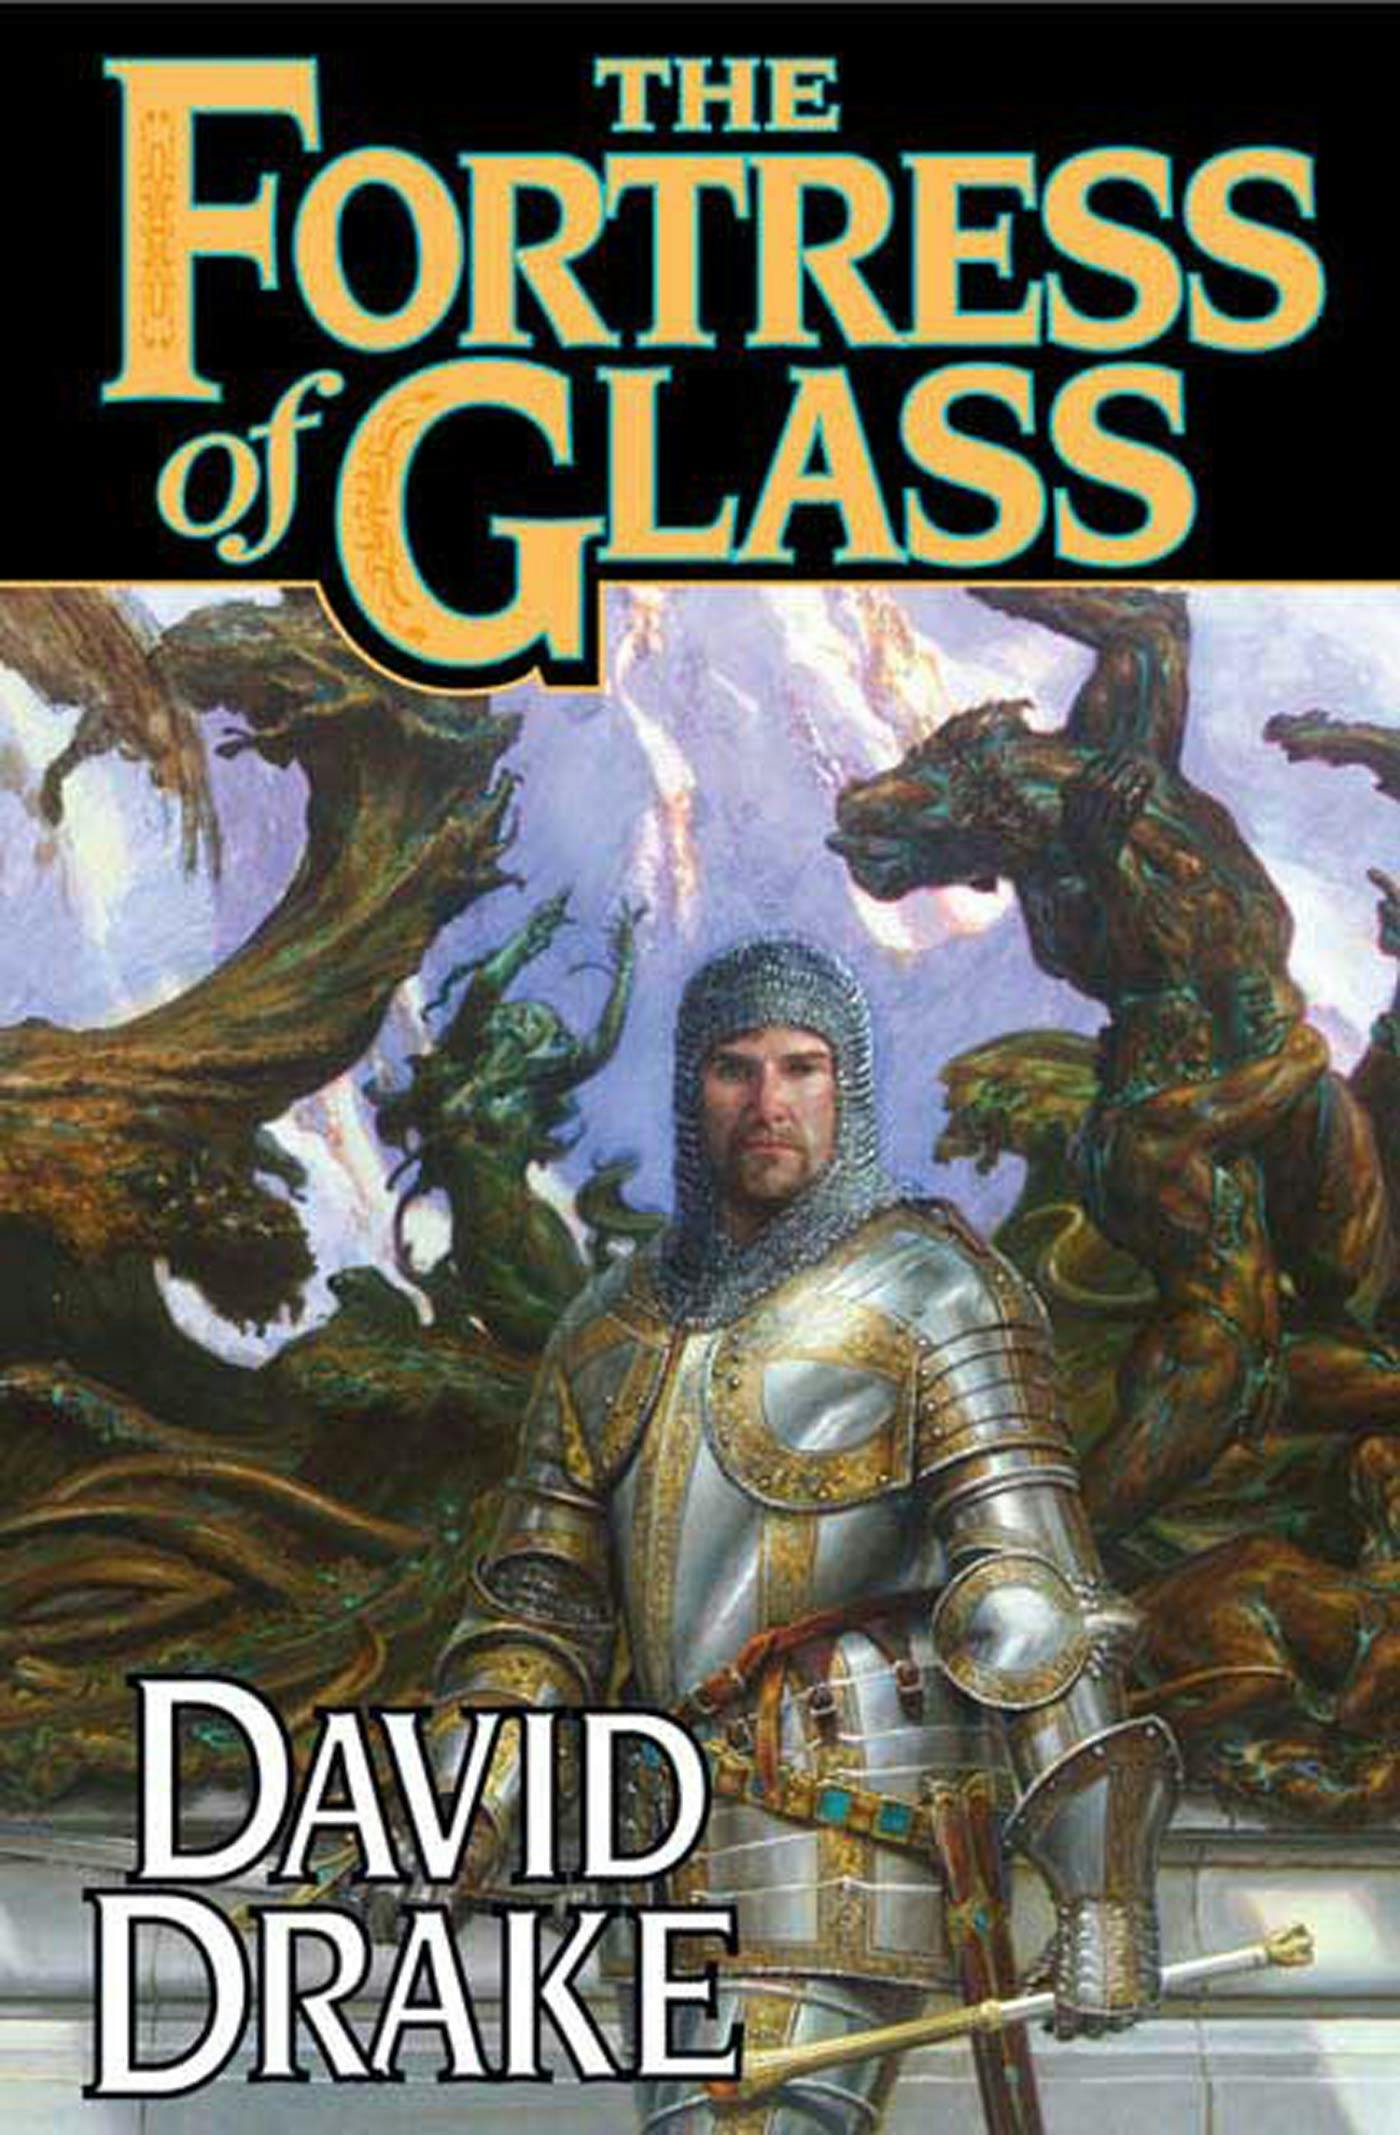 Cover for the book titled as: The Fortress of Glass